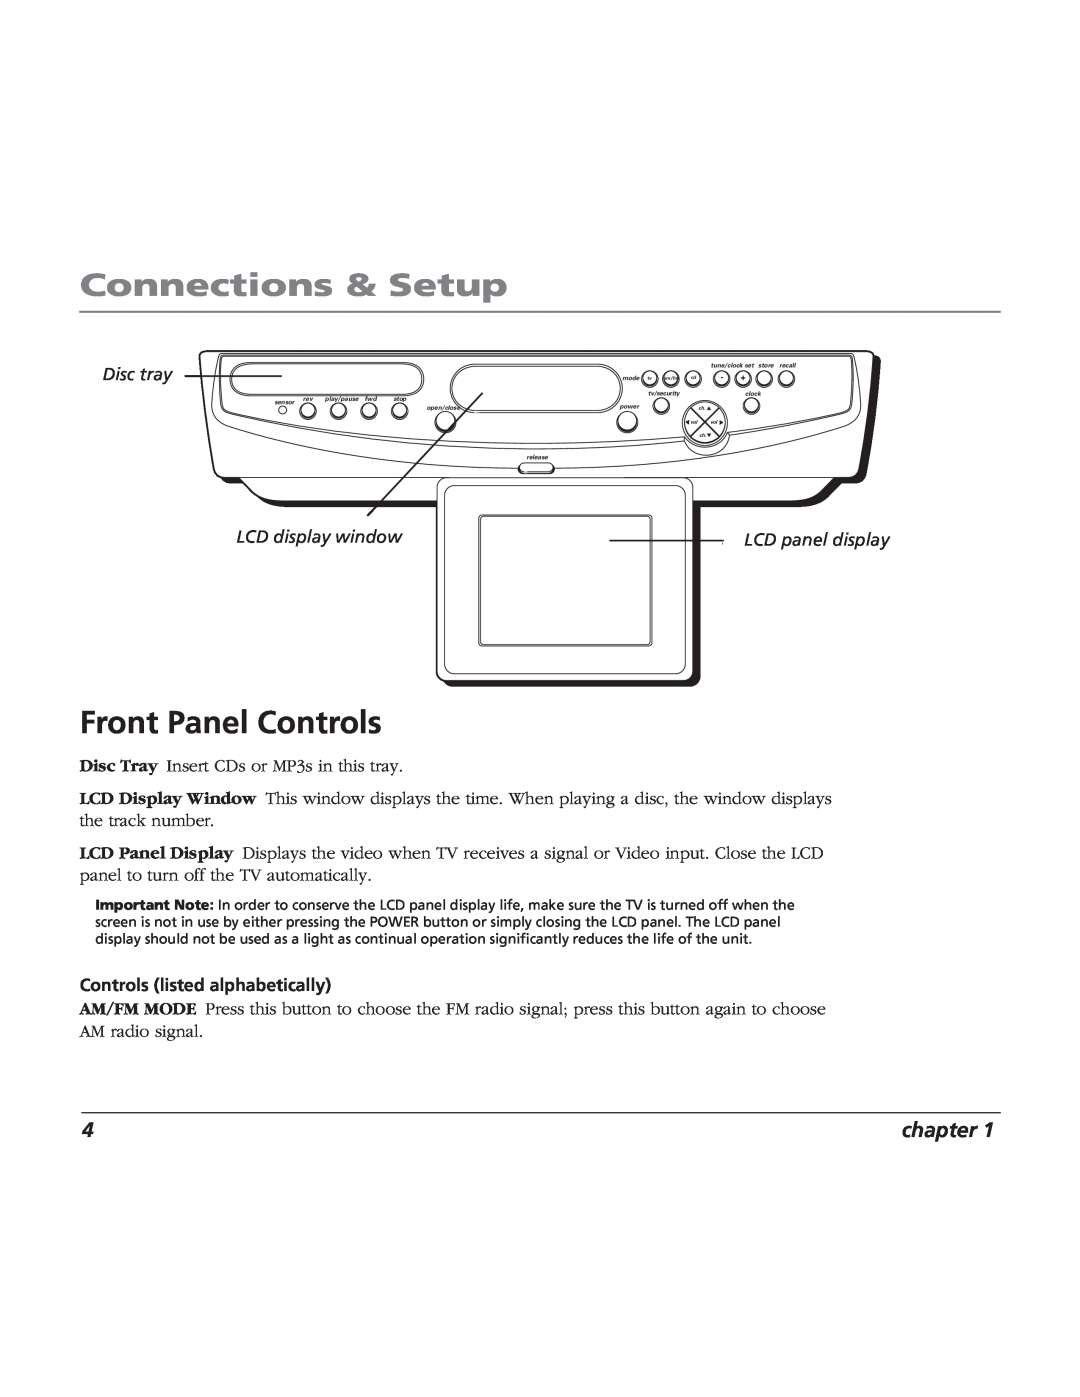 RCA TV/Radio/CD Player Front Panel Controls, Disc tray, LCD display window, LCD panel display, Connections & Setup 